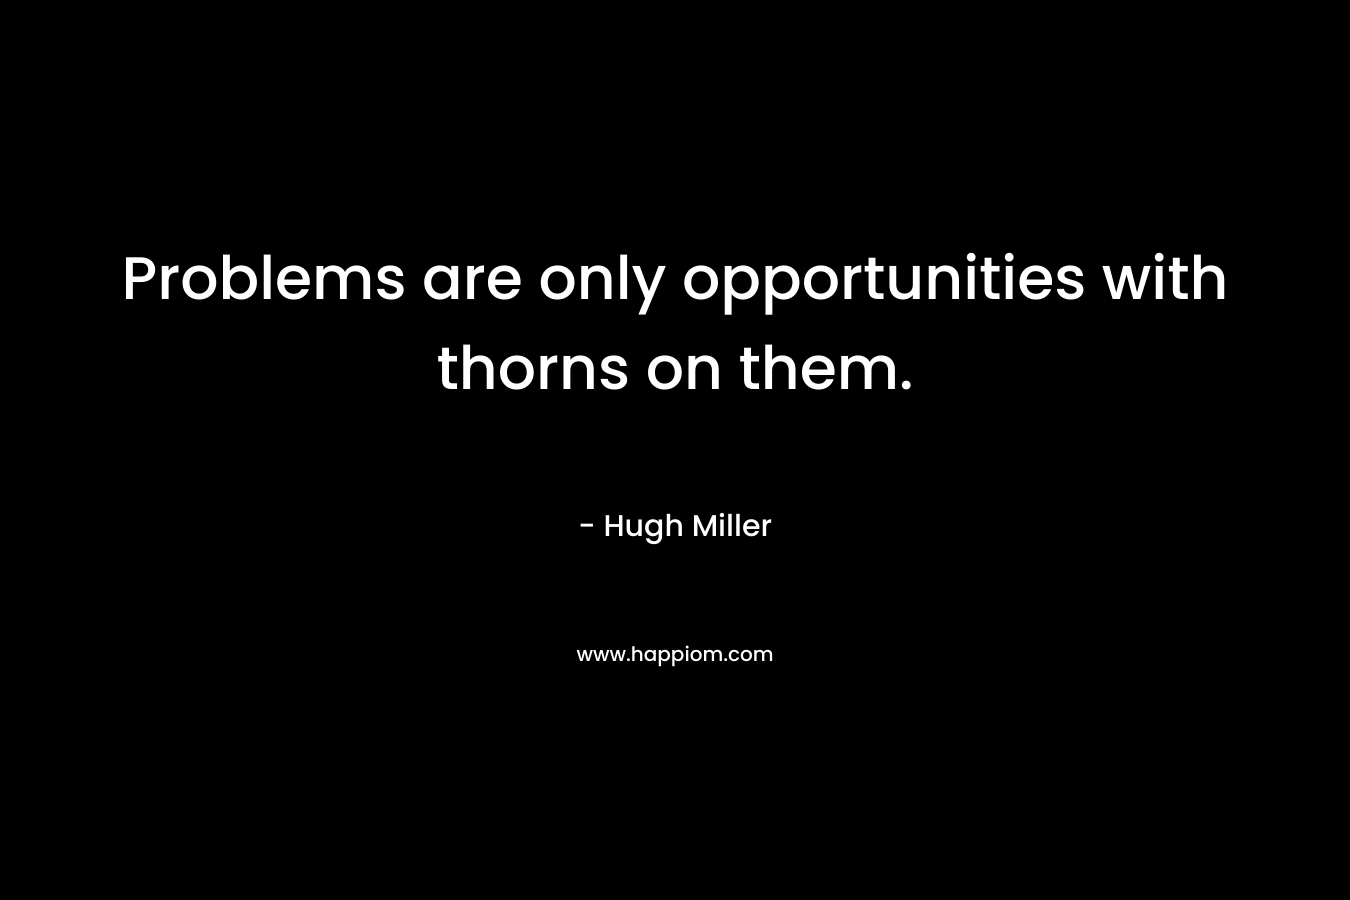 Problems are only opportunities with thorns on them. – Hugh Miller